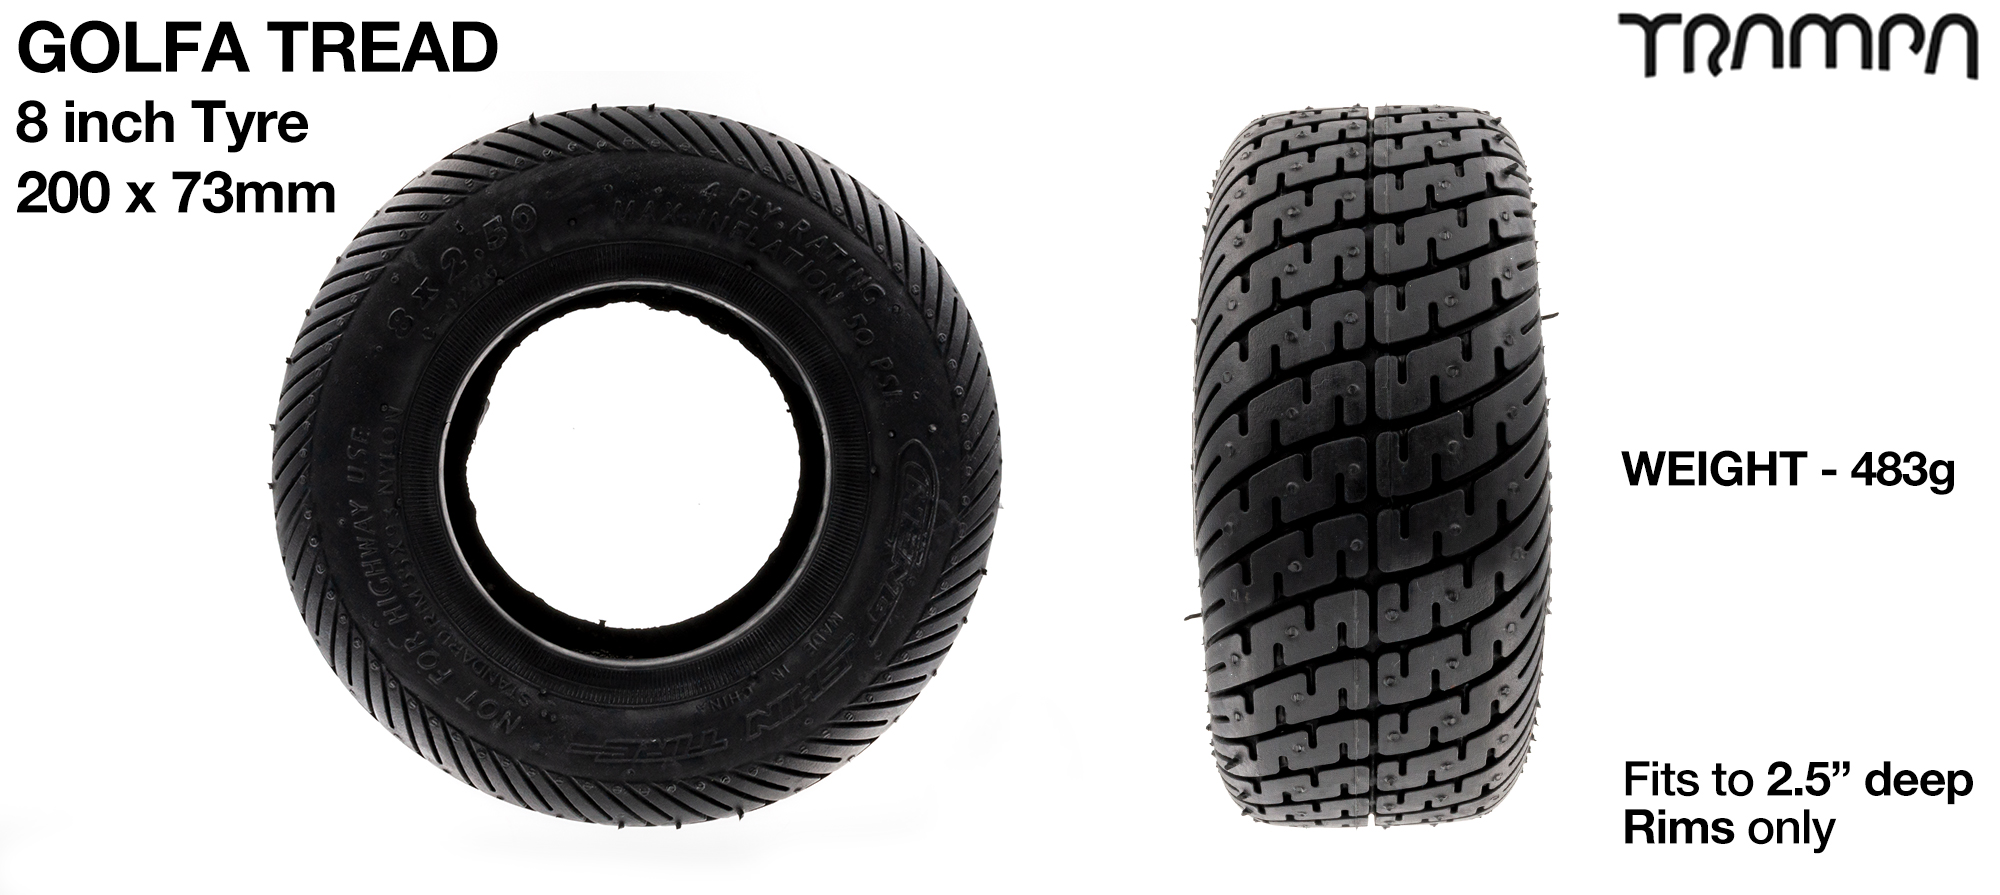 GOLFA PHATTY 8 inch Tyre measure 3.75x 3x 8 Inch or 200x75mm with 3.75 inch Rim will fit to DEEP-DISH MEGASTAR 8 3.75x 2.5 inch Hubs